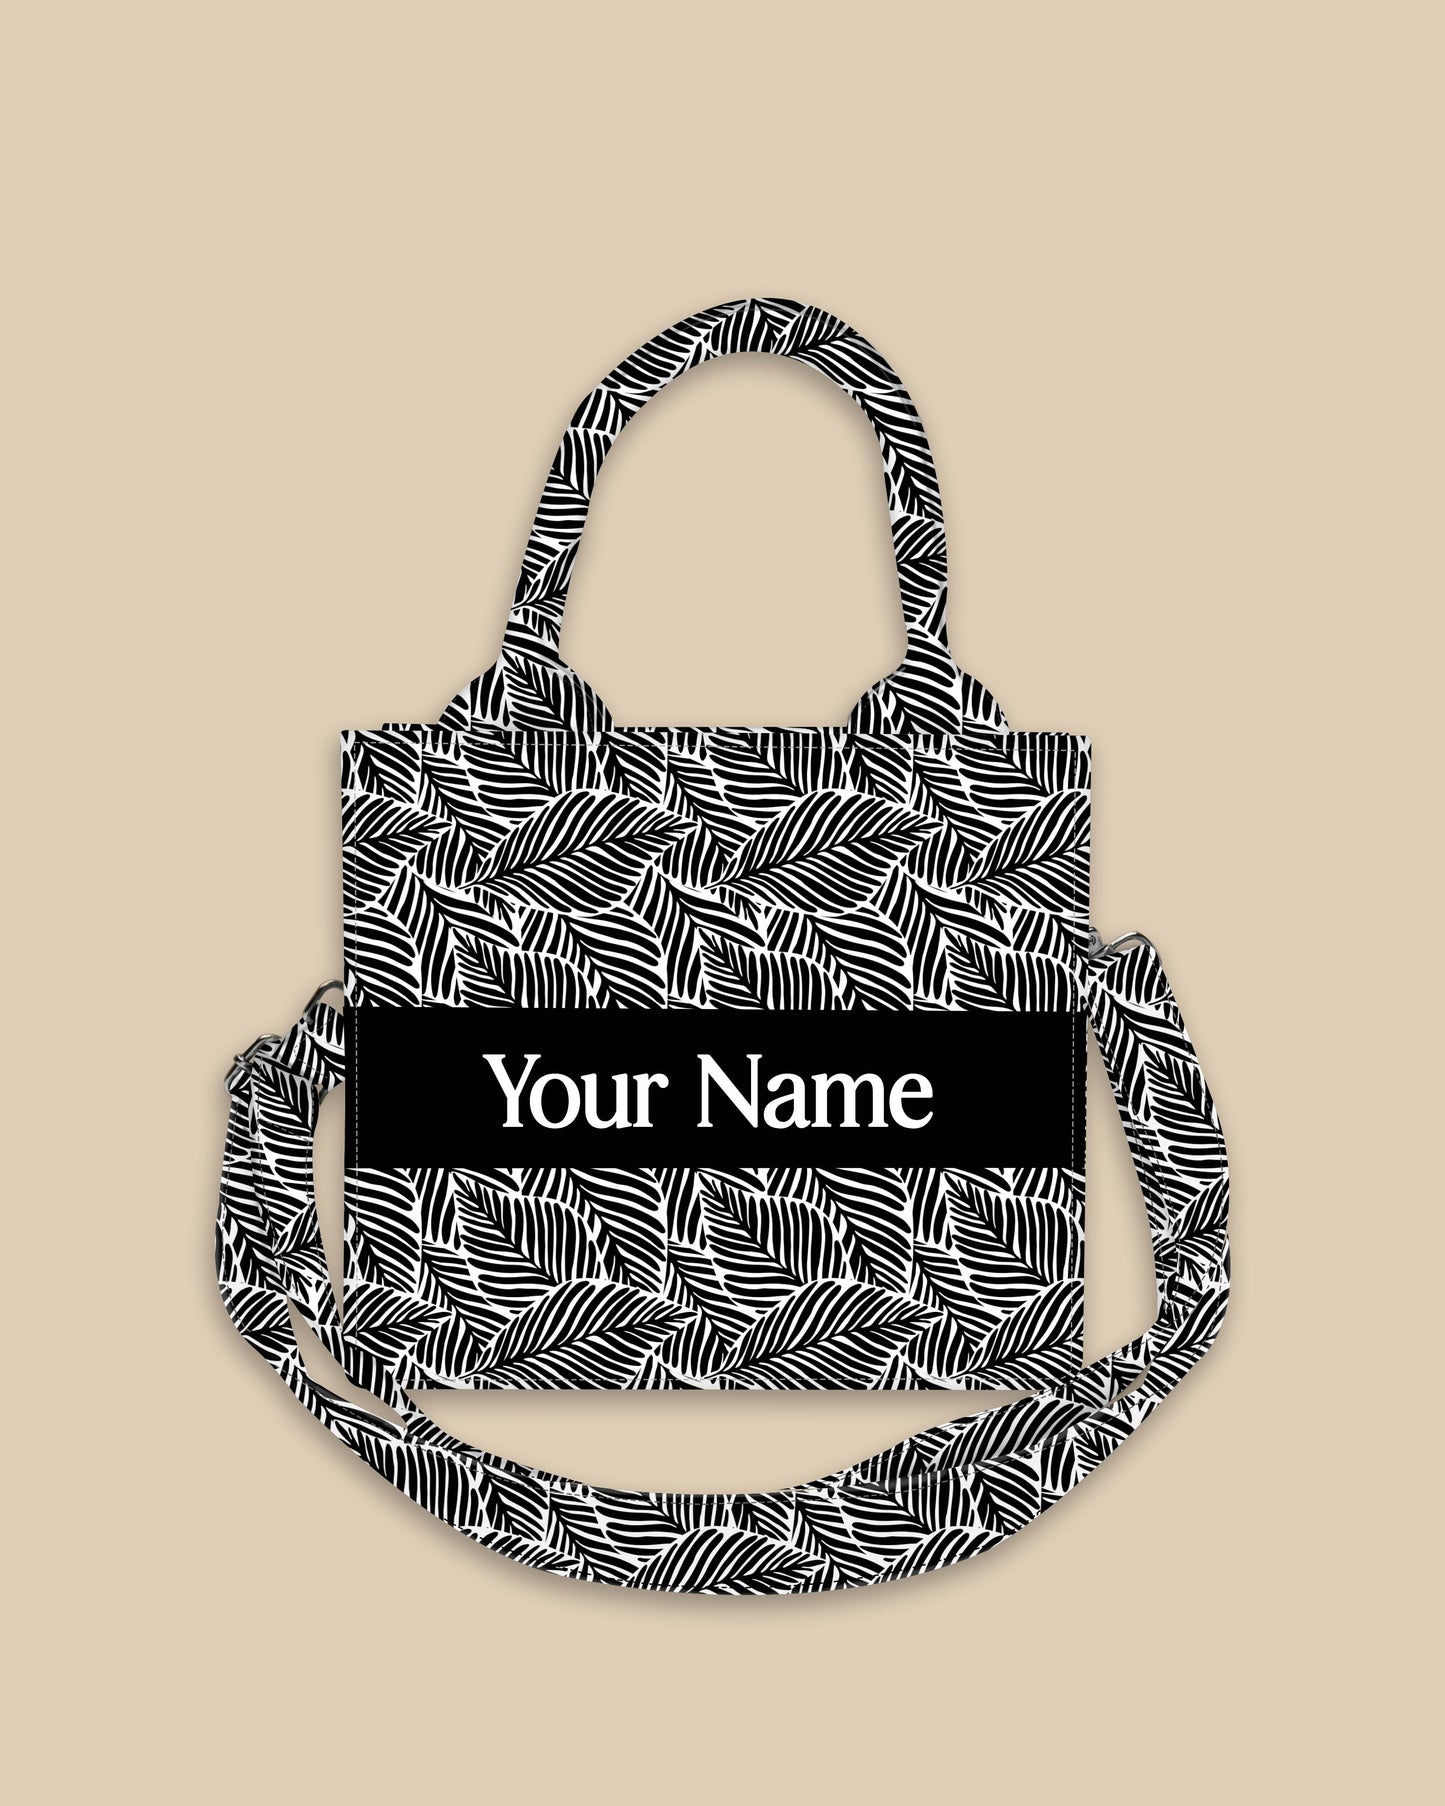 Customized Small Tote Bag Designed with Tropical Leaf Calligraphy